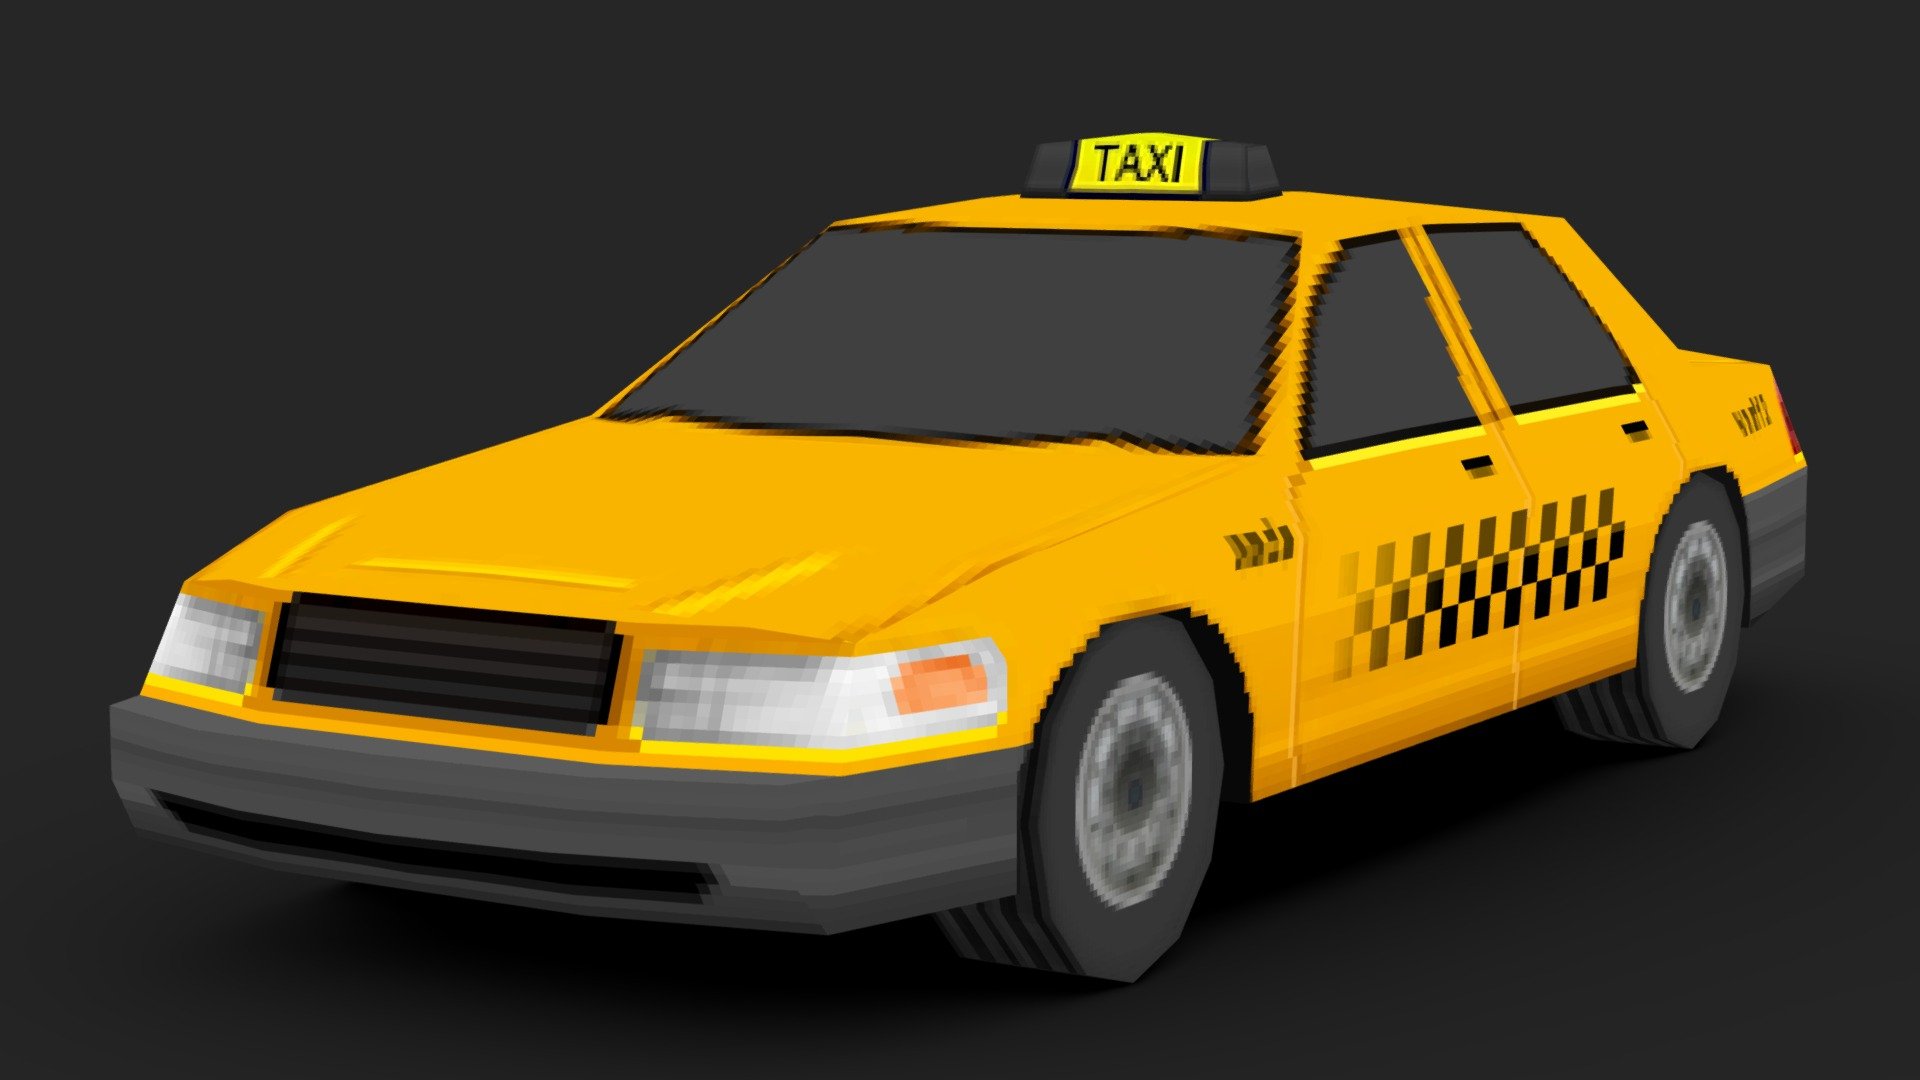 Preview for itch.io

Just a common yellow taxi in PS1 graphics style. It's not finished yet, I'm still working on it.

The textures are 256x256 3d model